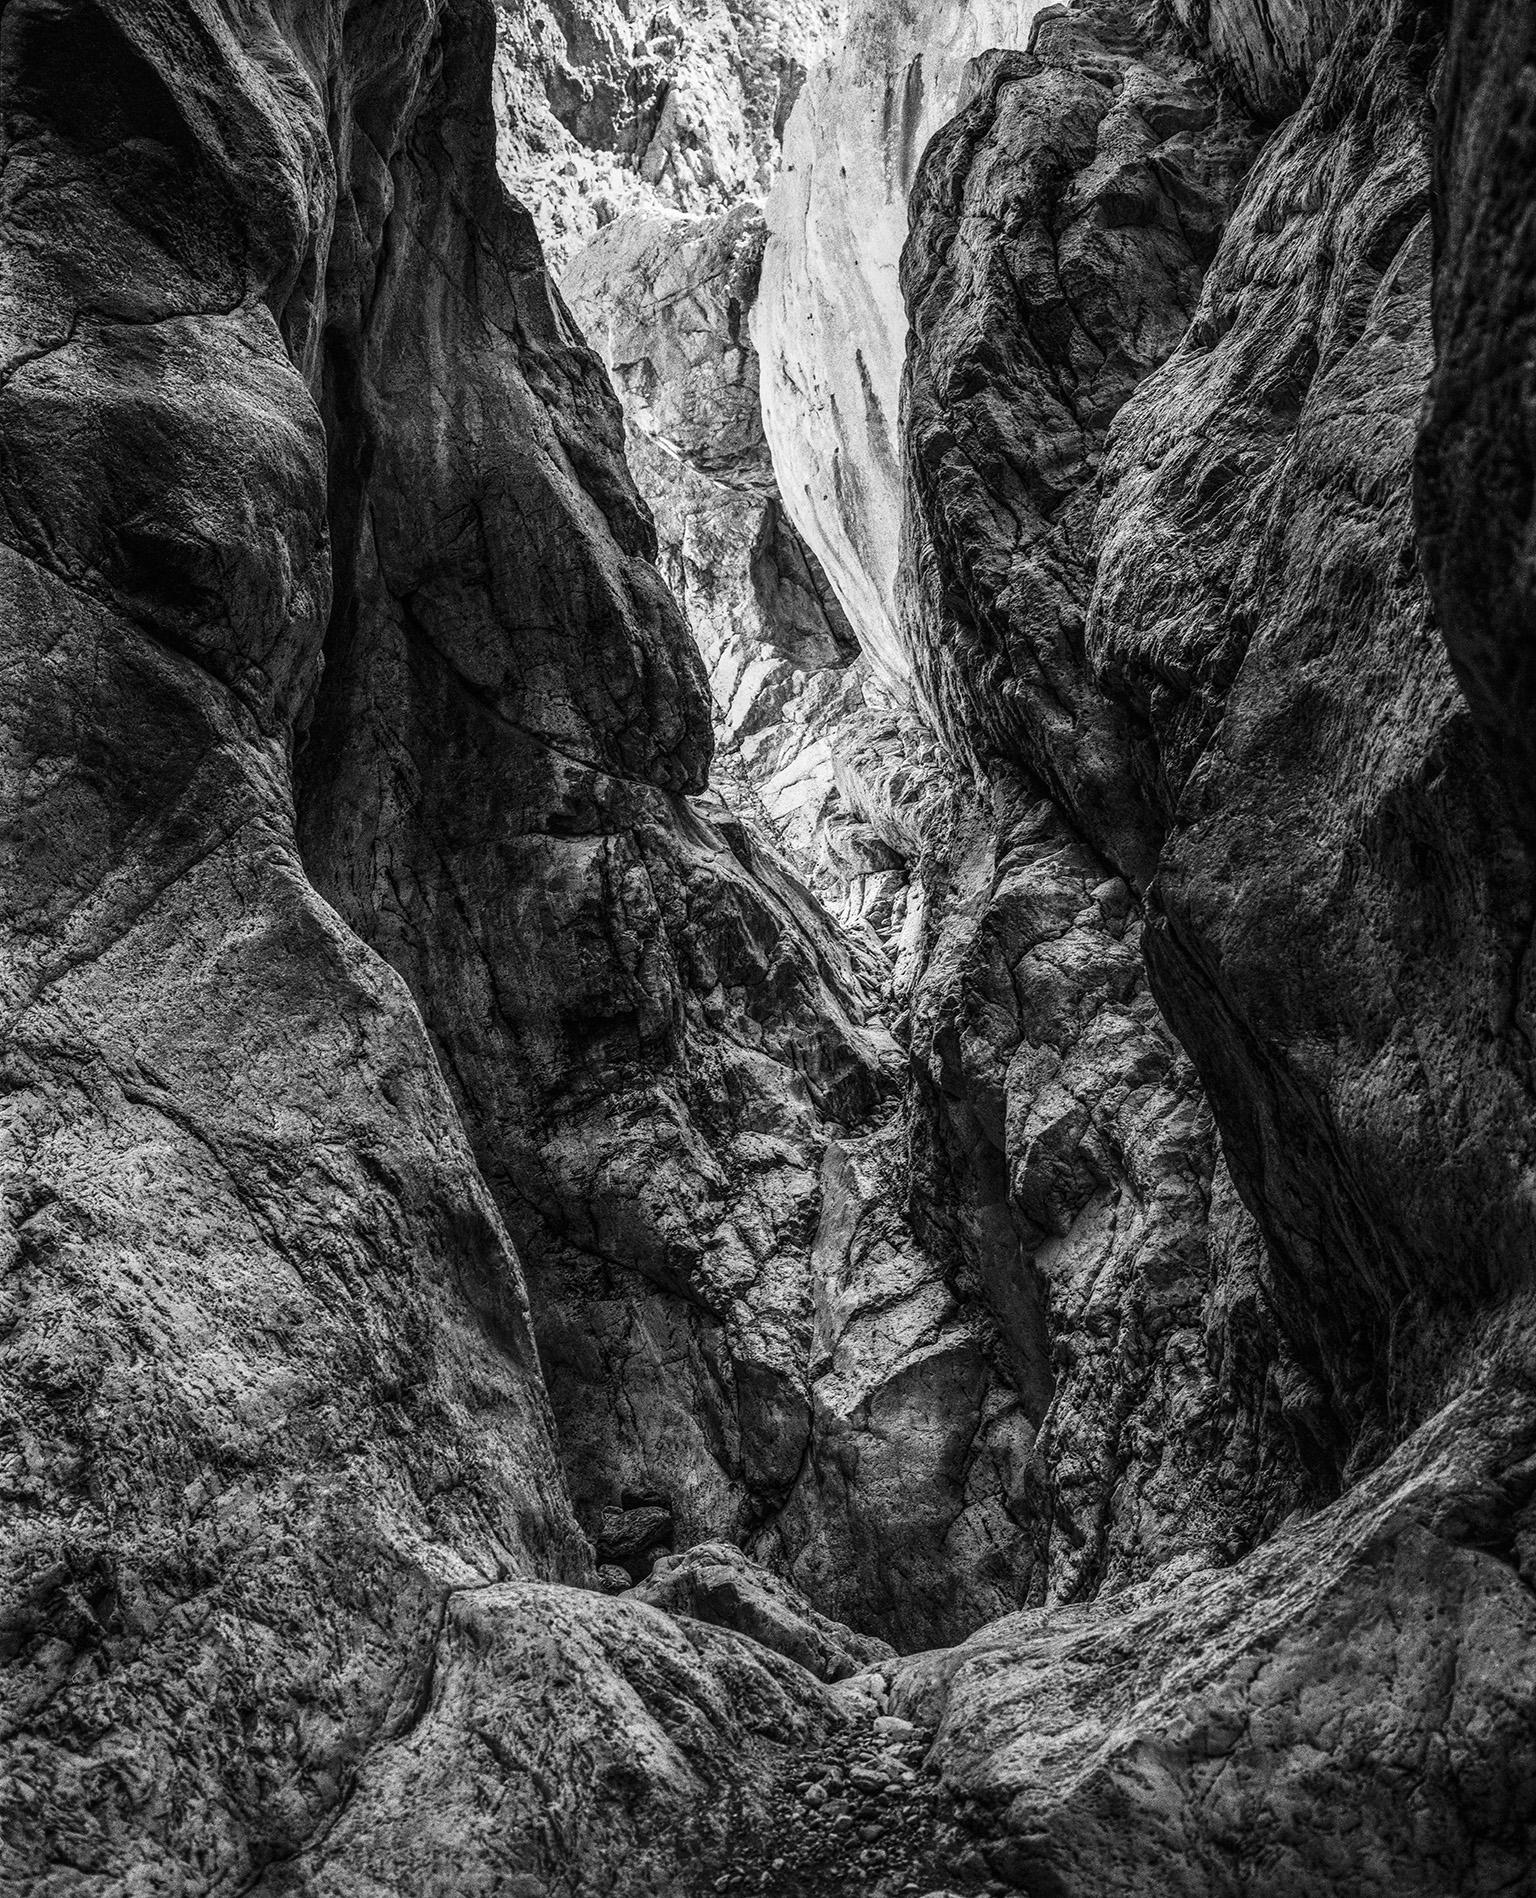 John Stathatos Black and White Photograph - Homage to Heraclitus: Earth III - Black and White Landscape Photograph of a Cave